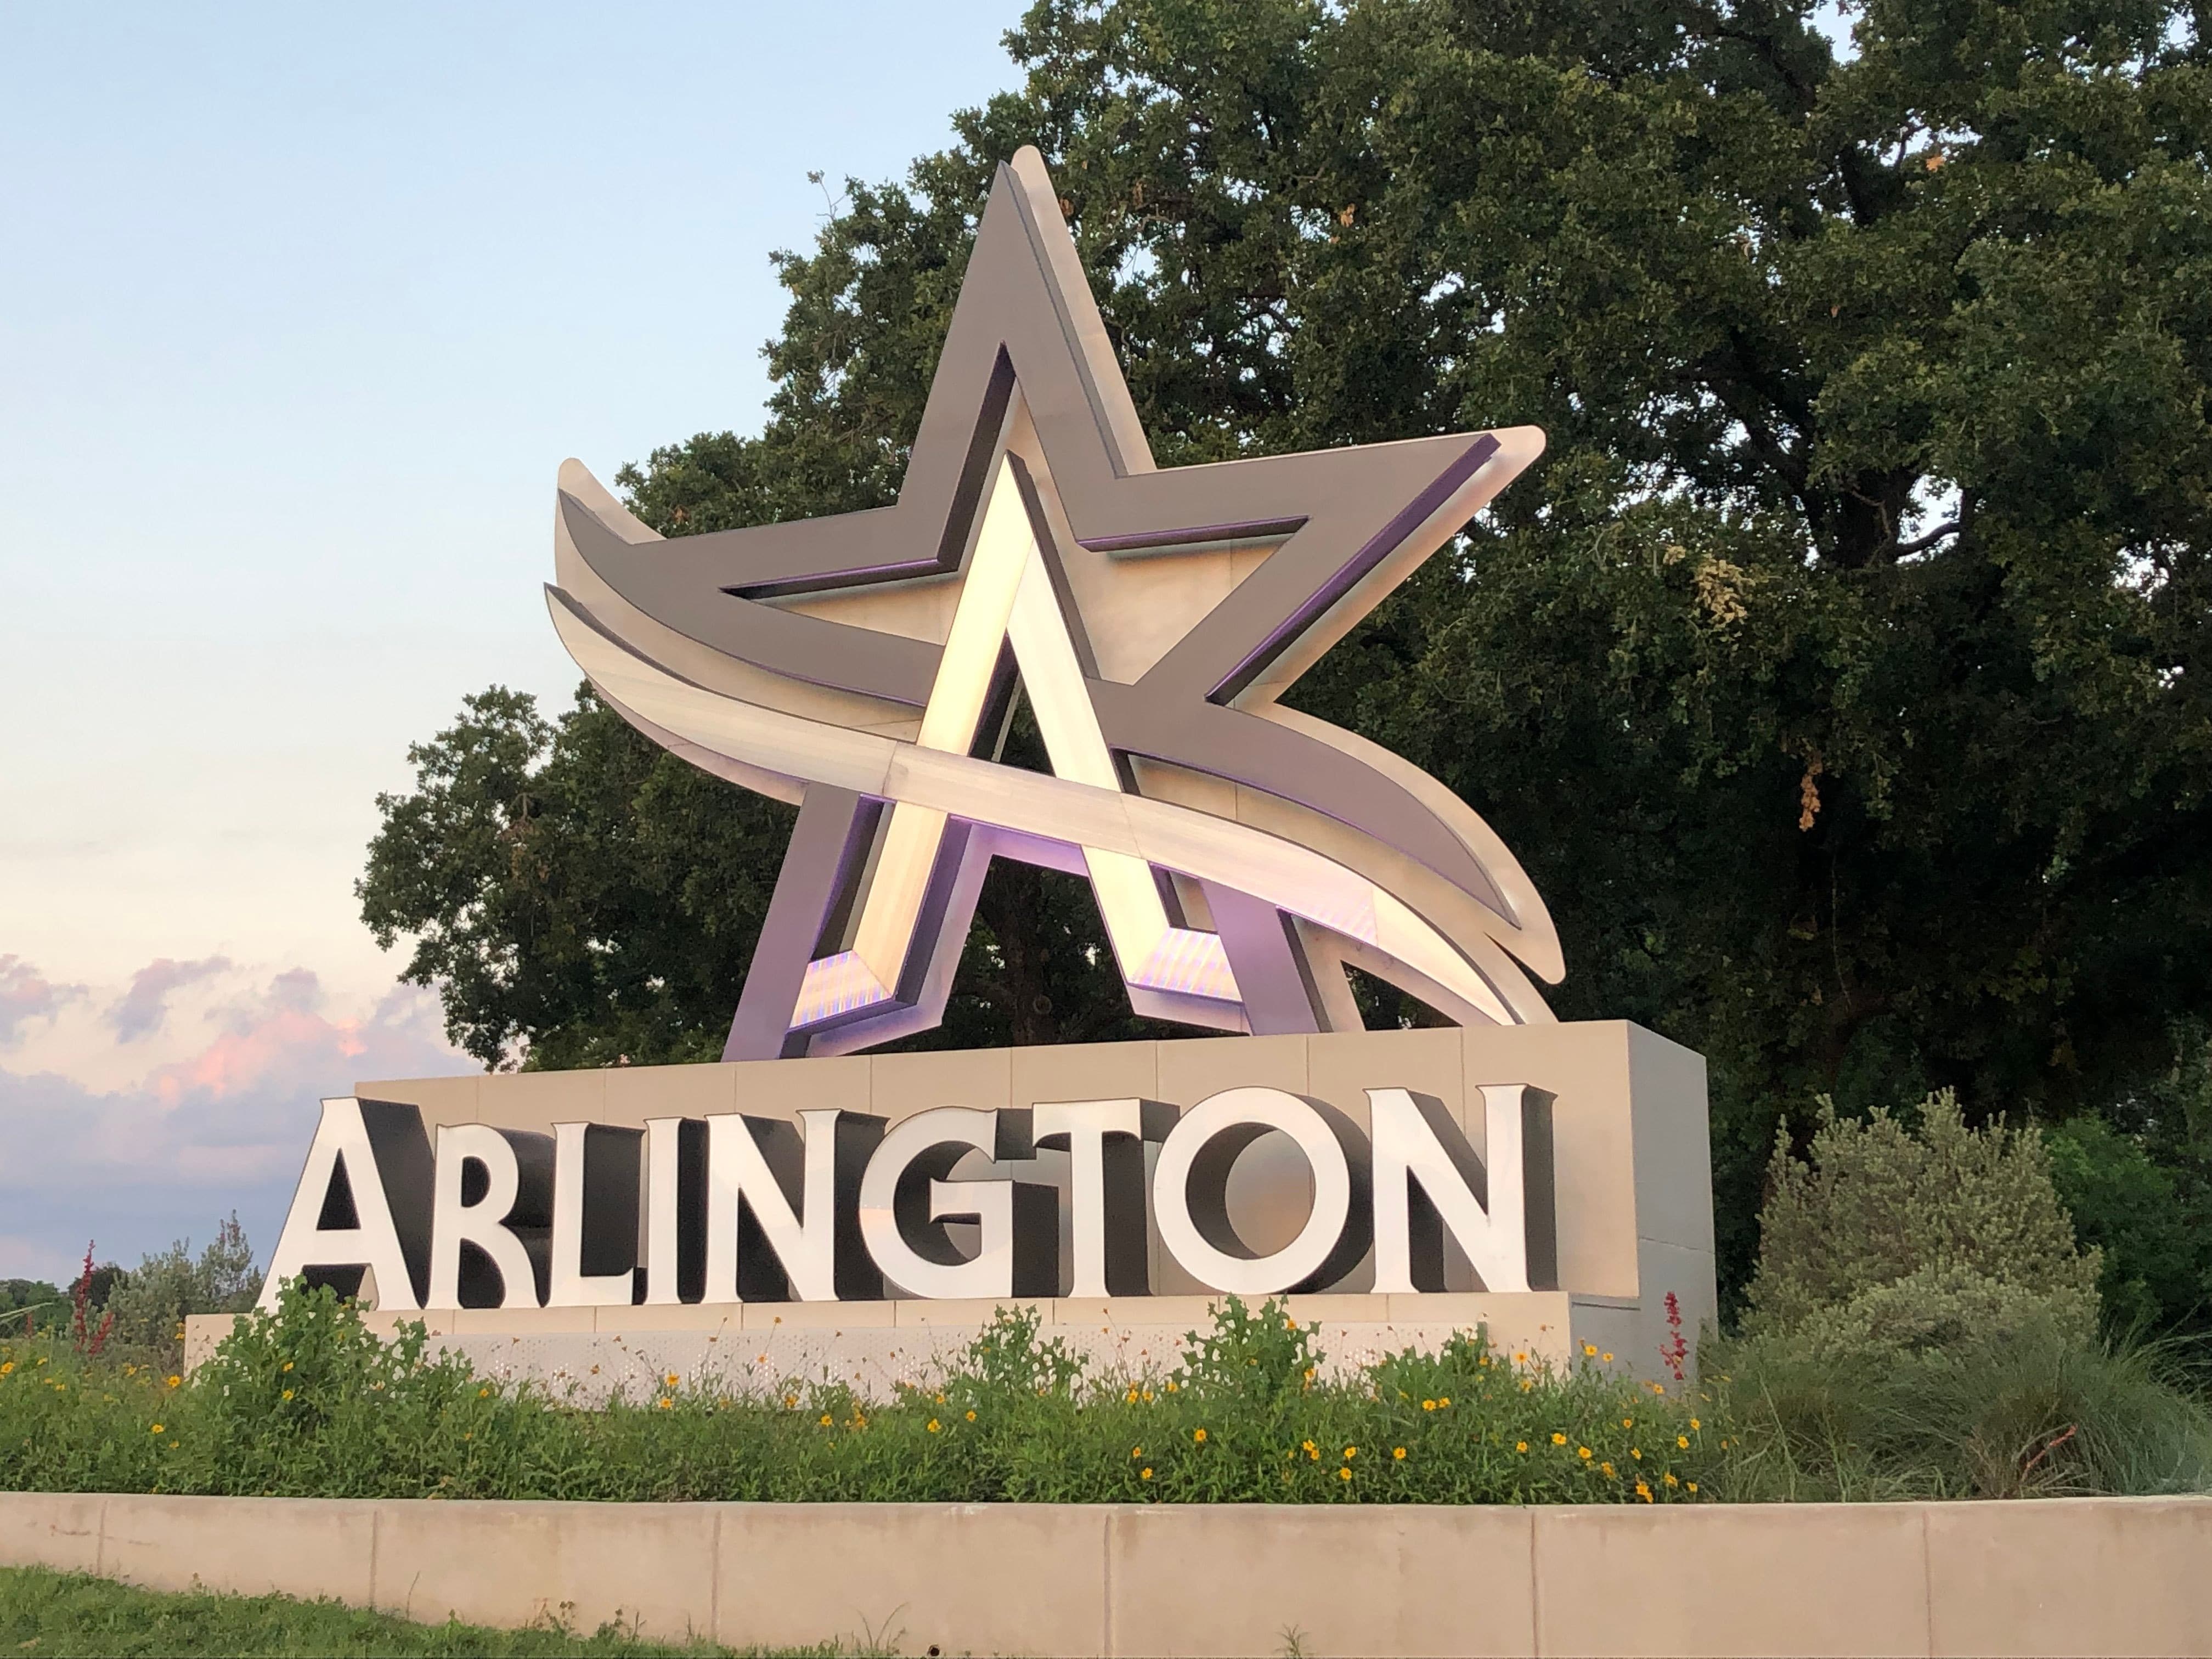 As your Arlington, TX, real estate agent, count on our highly experienced property professionals at Sterling Real Estate. We’re eager to meet with you in person